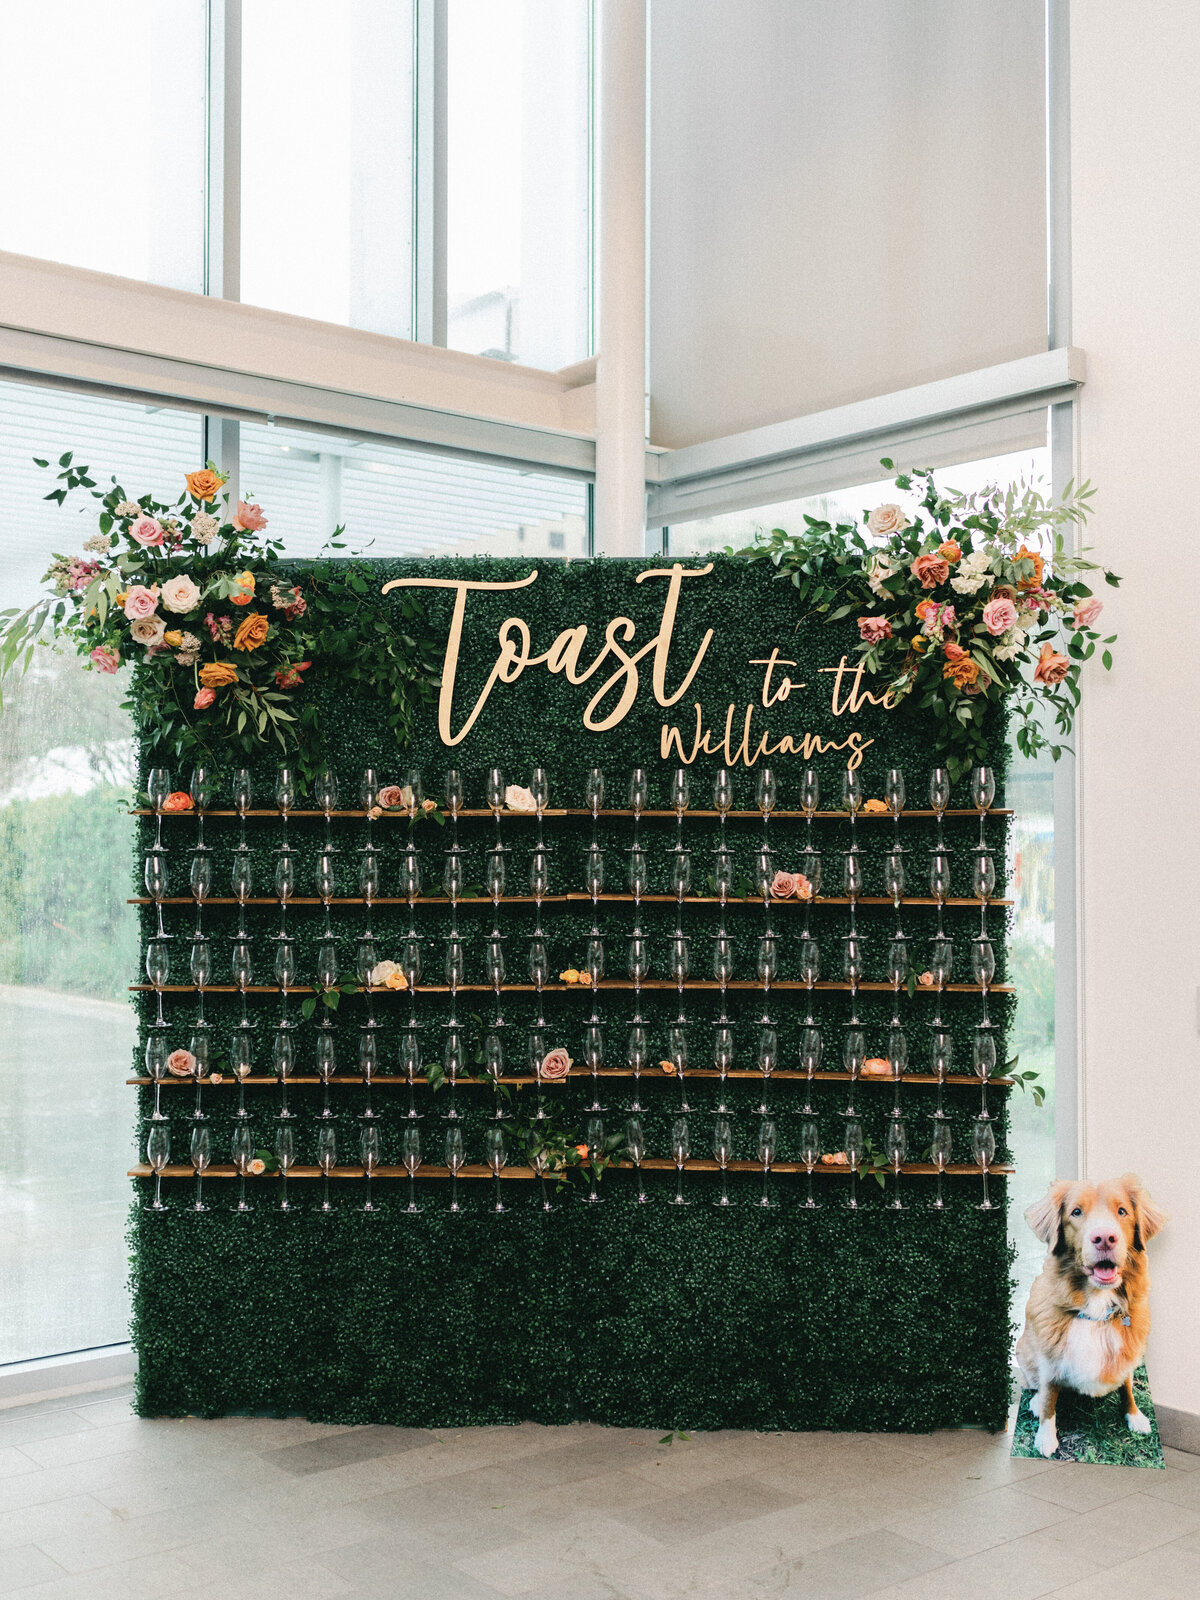 Champagne toast wedding backdrop made of greenery and decorated with florals